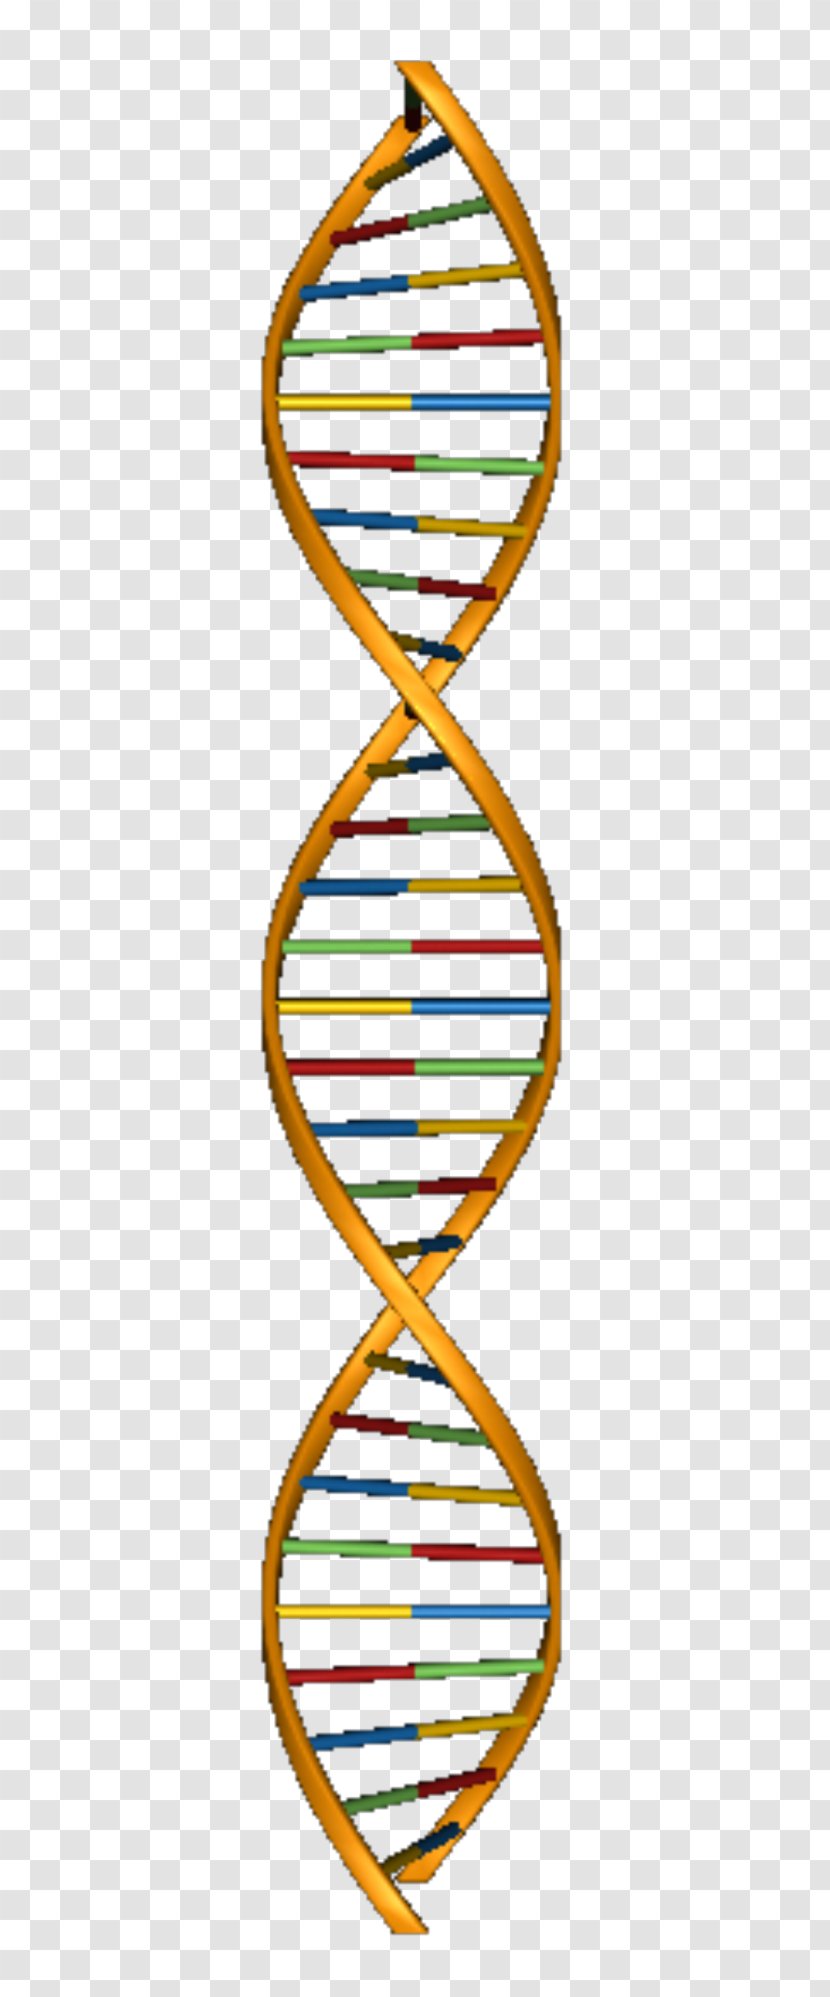 Molecular Models Of DNA Nucleic Acid Structure Double Helix Clip Art ...